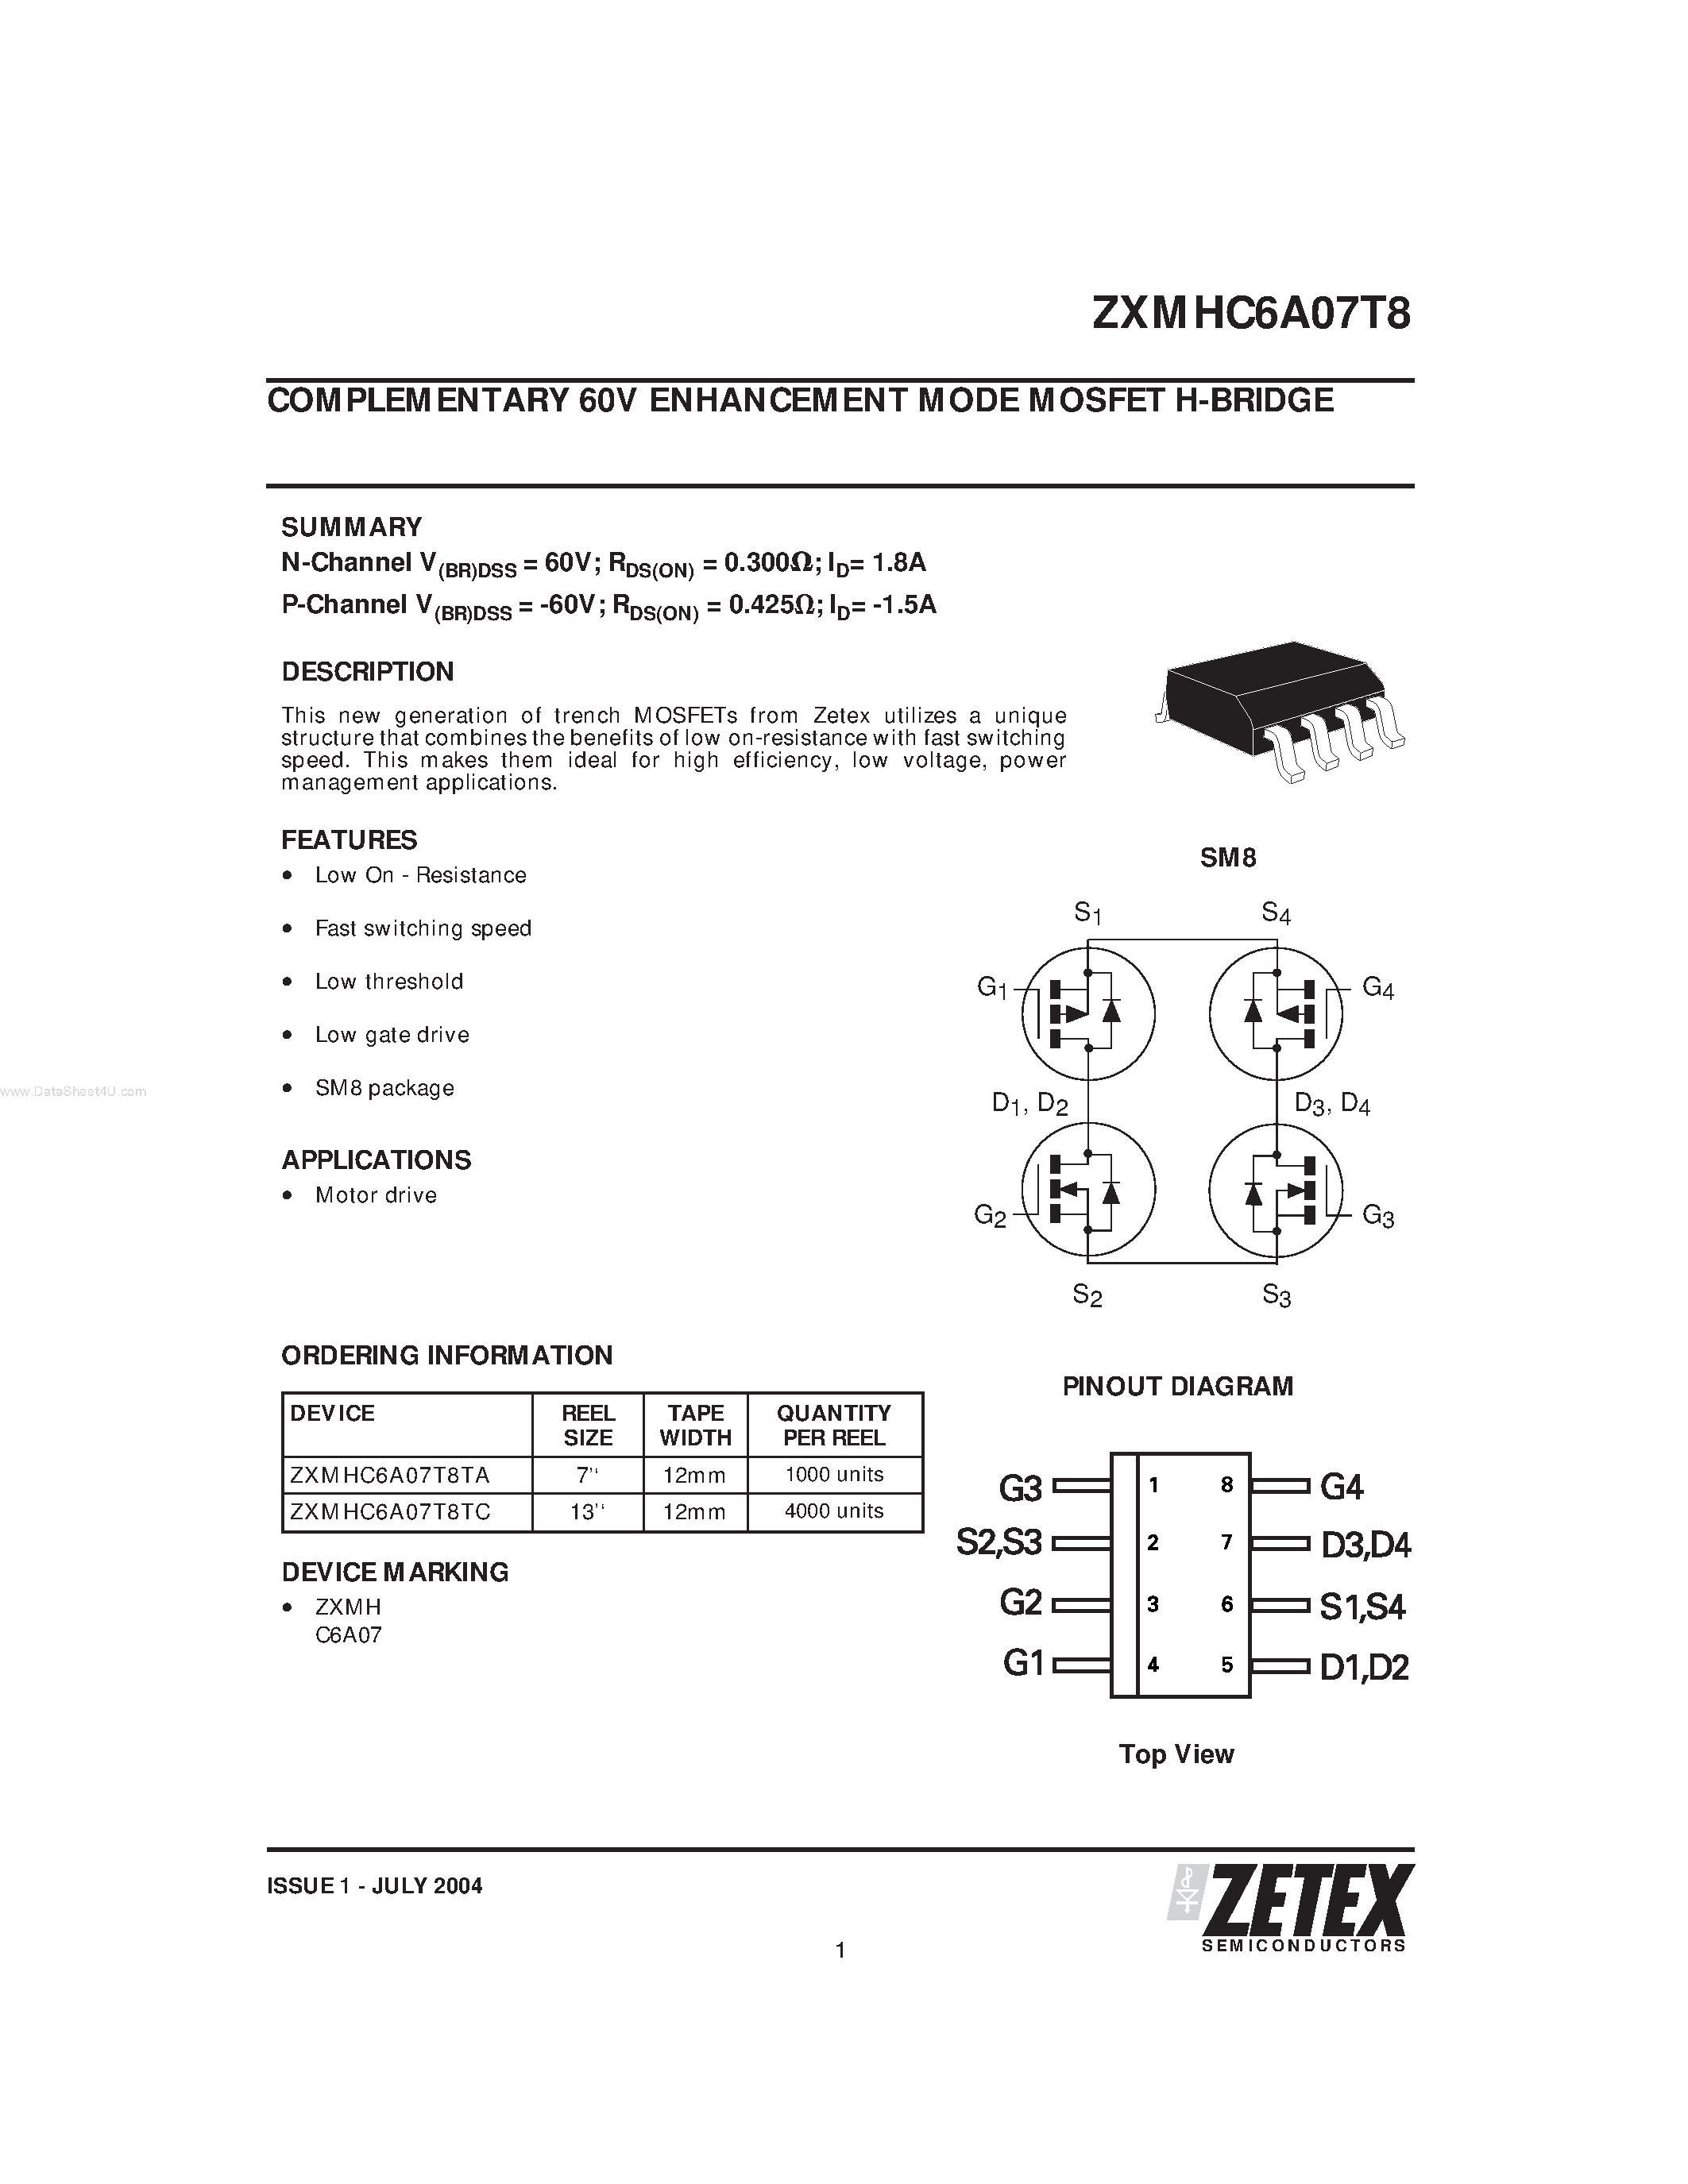 Datasheet ZXMHC6A07T8 - COMPLEMENTARY 60V ENHANCEMENT MODE MOSFET H-BRIDGE page 1